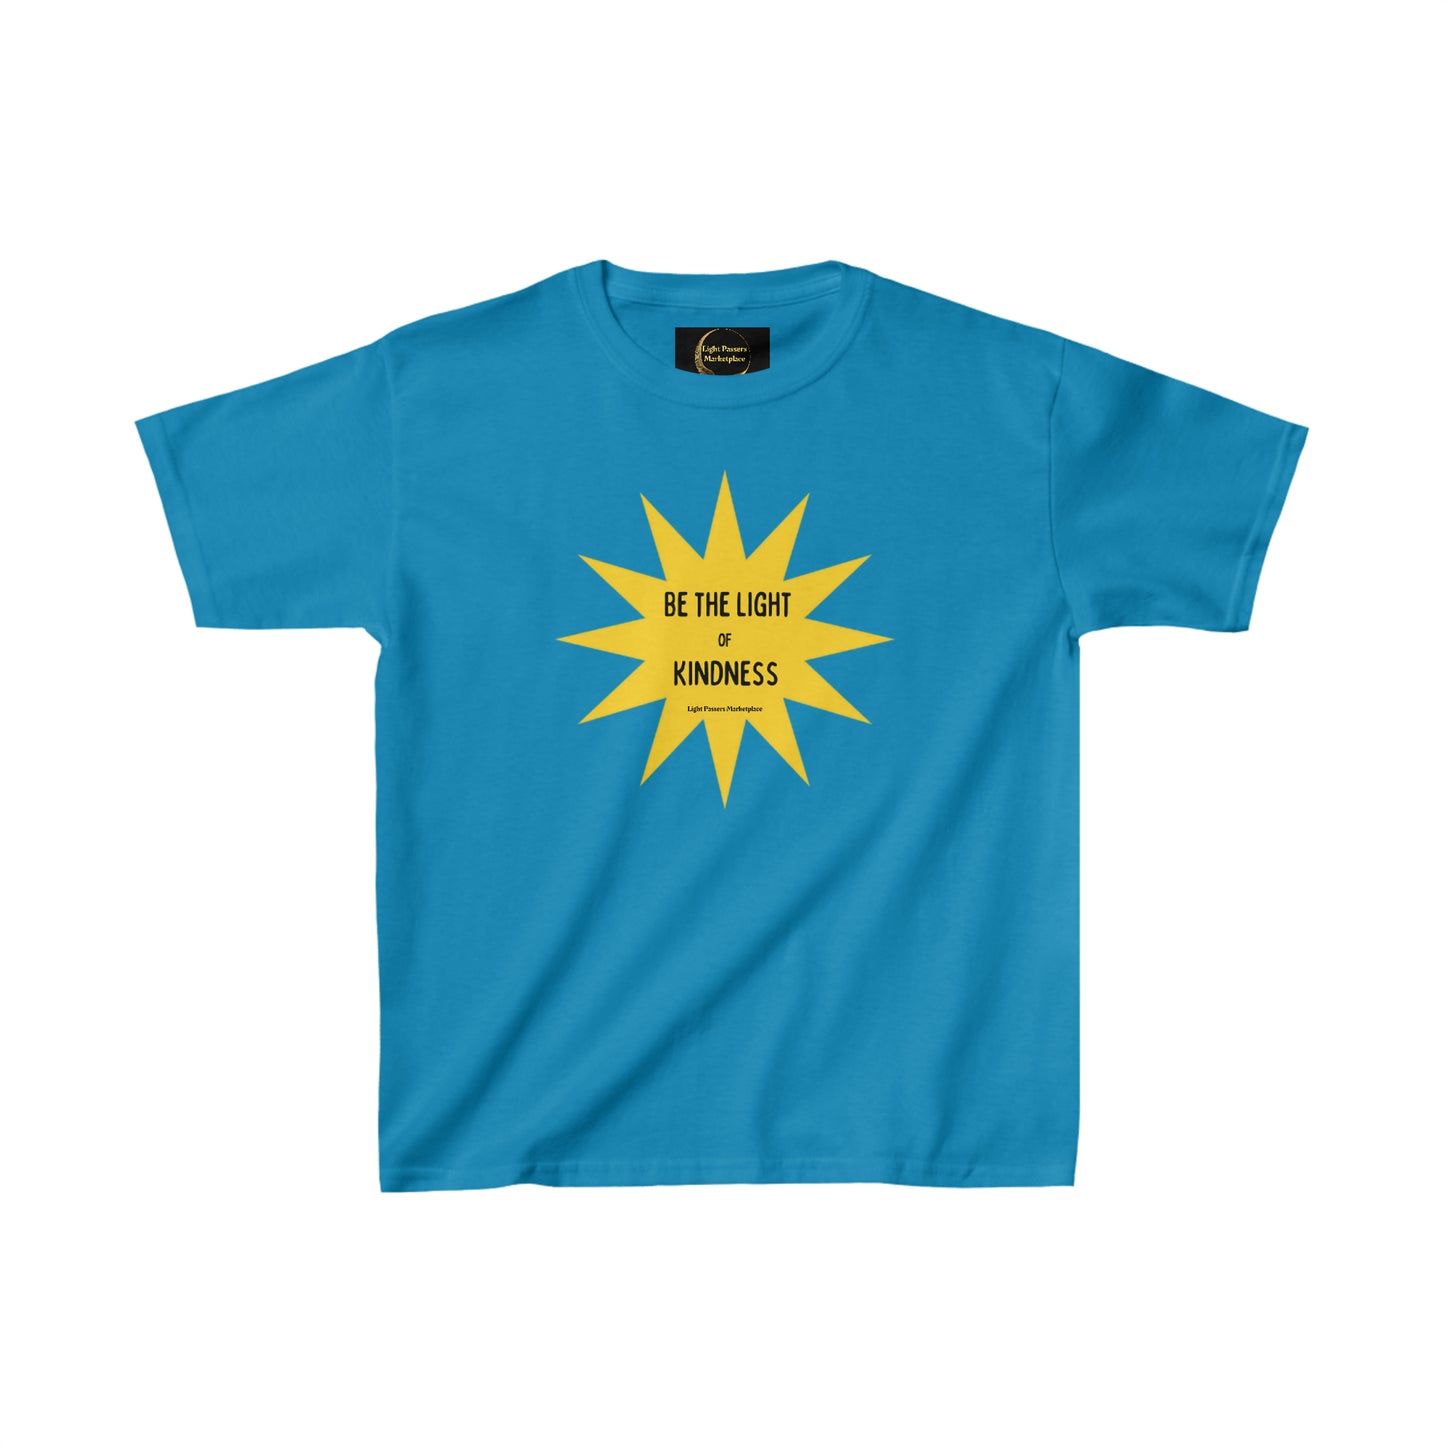 Youth cotton T-shirt featuring a yellow star and black text on a blue background. Made of 100% cotton, ideal for printing, with twill tape shoulders and curl-resistant collar.